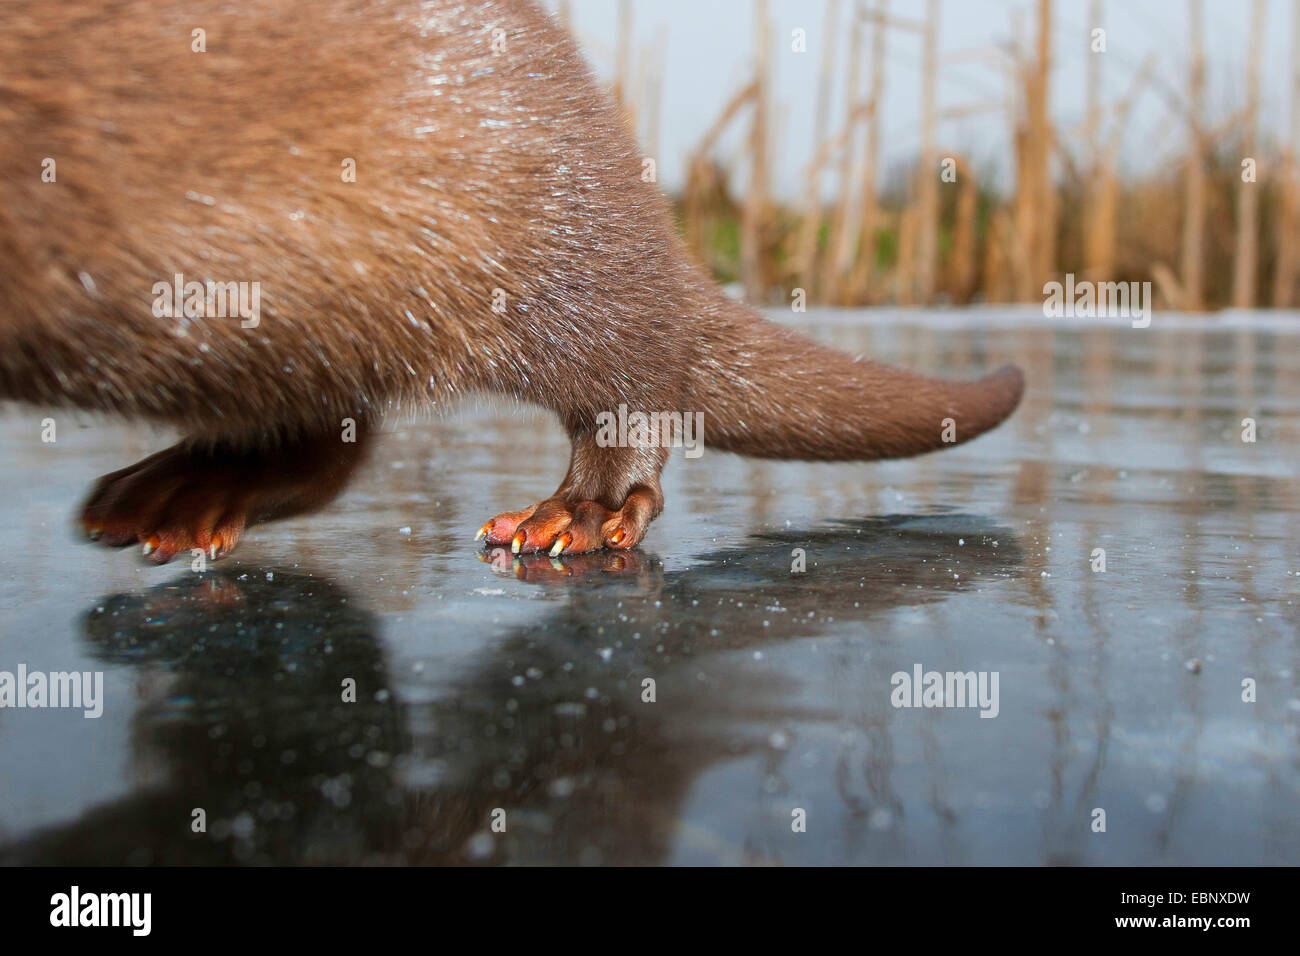 European river otter, European Otter, Eurasian Otter (Lutra lutra), hind paws on a frozen up sheet of ice, Germany Stock Photo